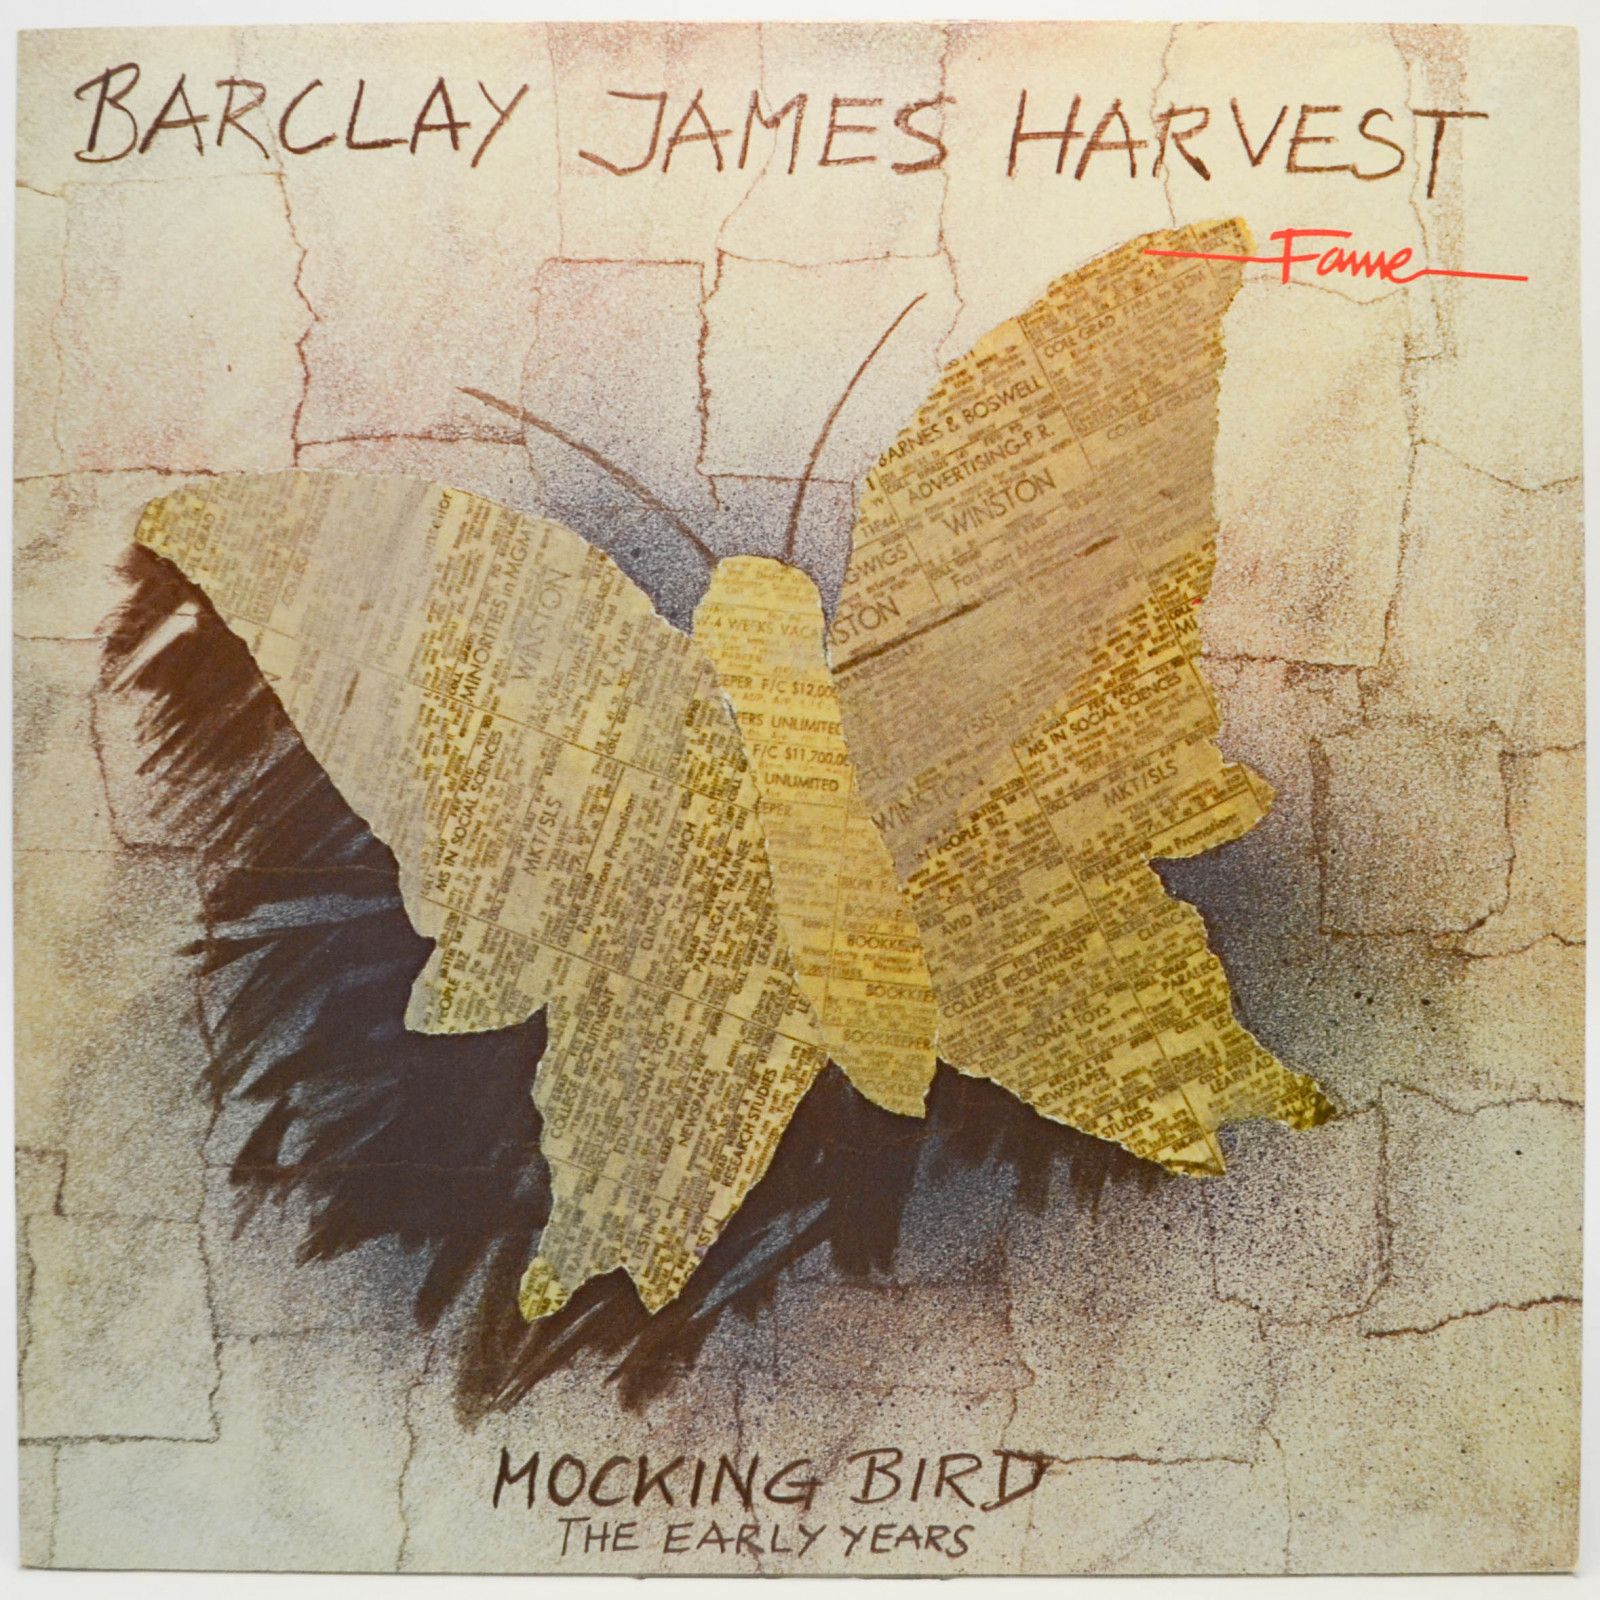 Barclay James Harvest — Mocking Bird (The Early Years), 1980